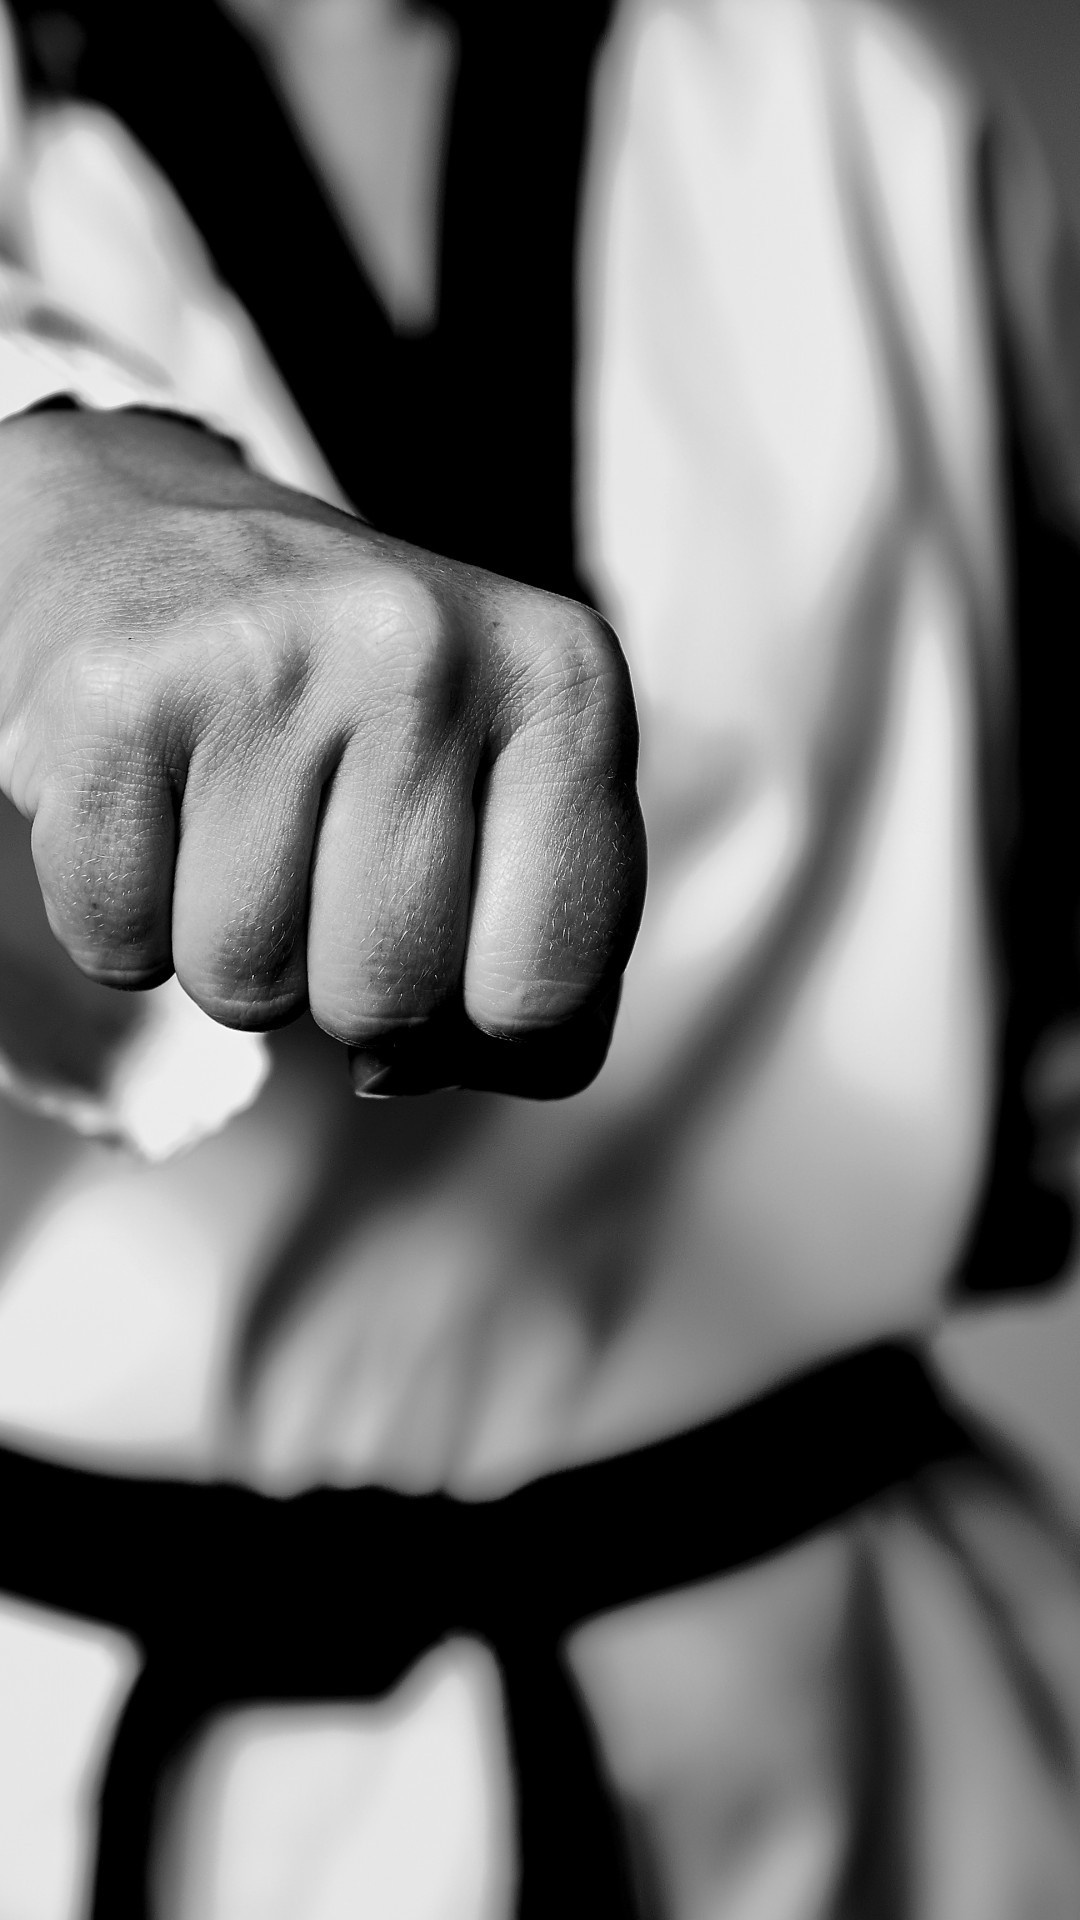 Taekwondo: Monochrome Korean form of martial arts characterized by punching and kicking techniques. 1080x1920 Full HD Wallpaper.